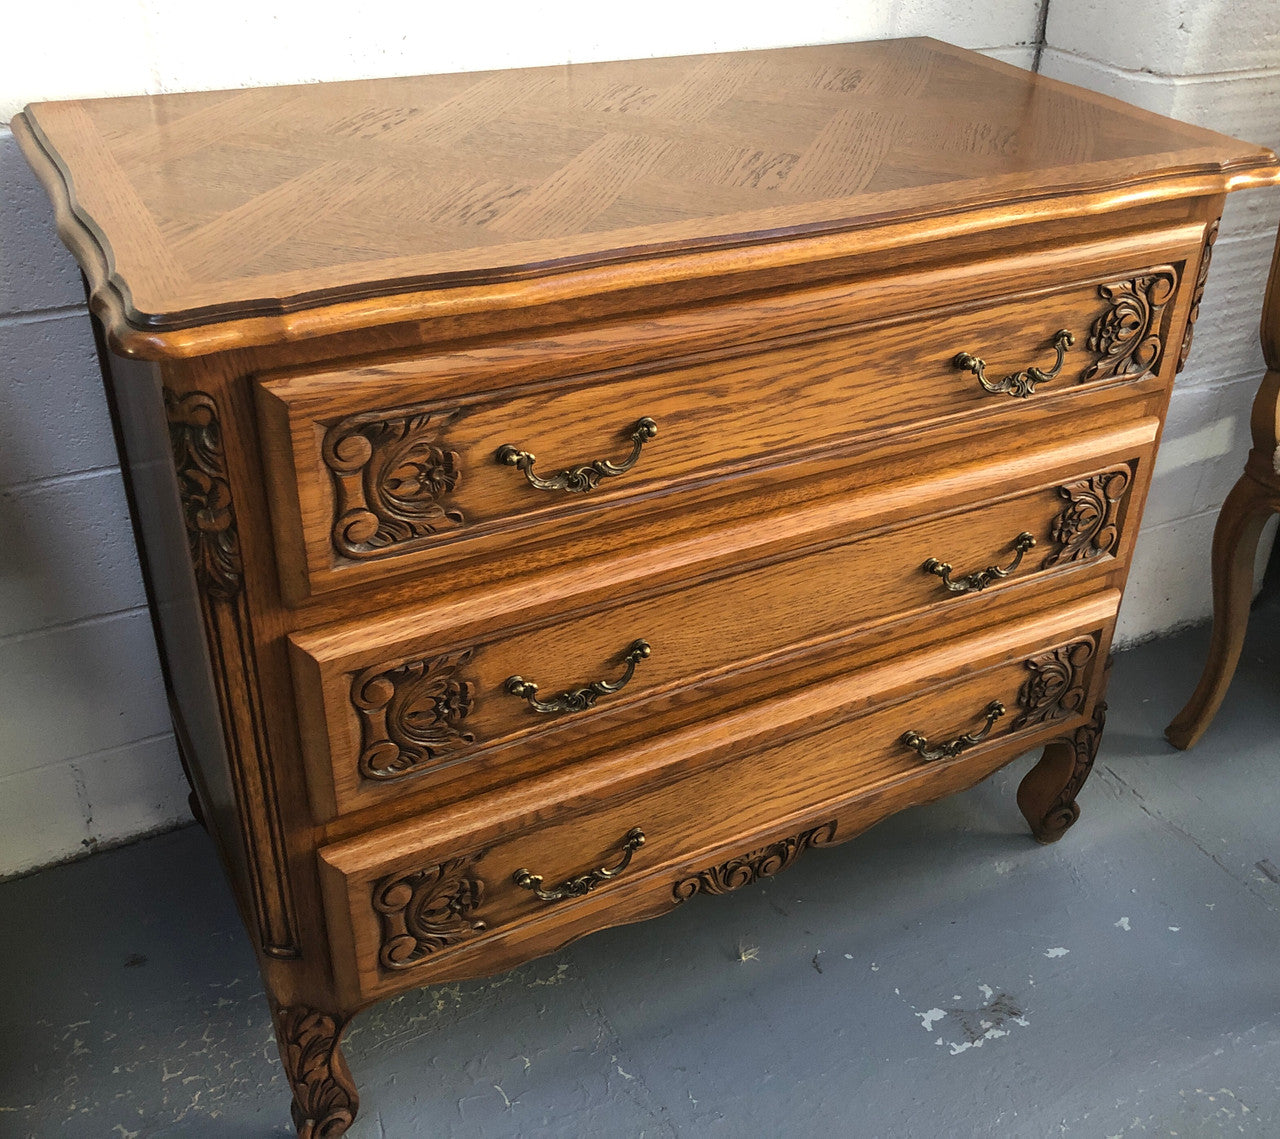 Gorgeous Provincial oak and parquetry top commode. It has beautiful carved Details and in good original detailed condition.